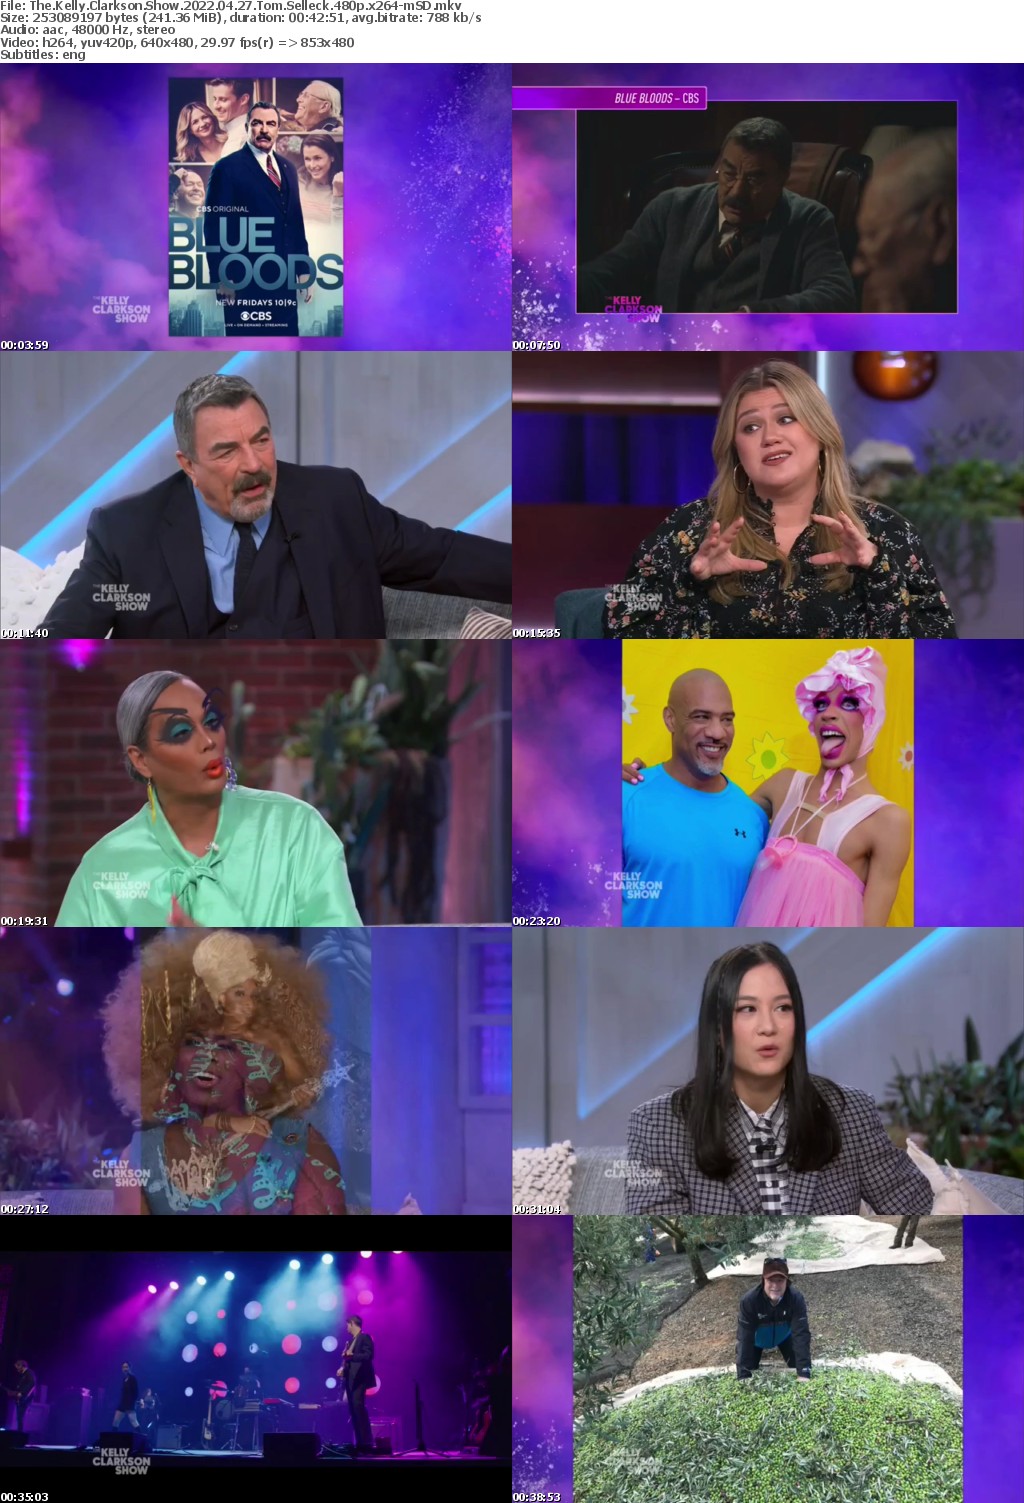 The Kelly Clarkson Show 2022 04 27 Tom Selleck 480p x264-mSD